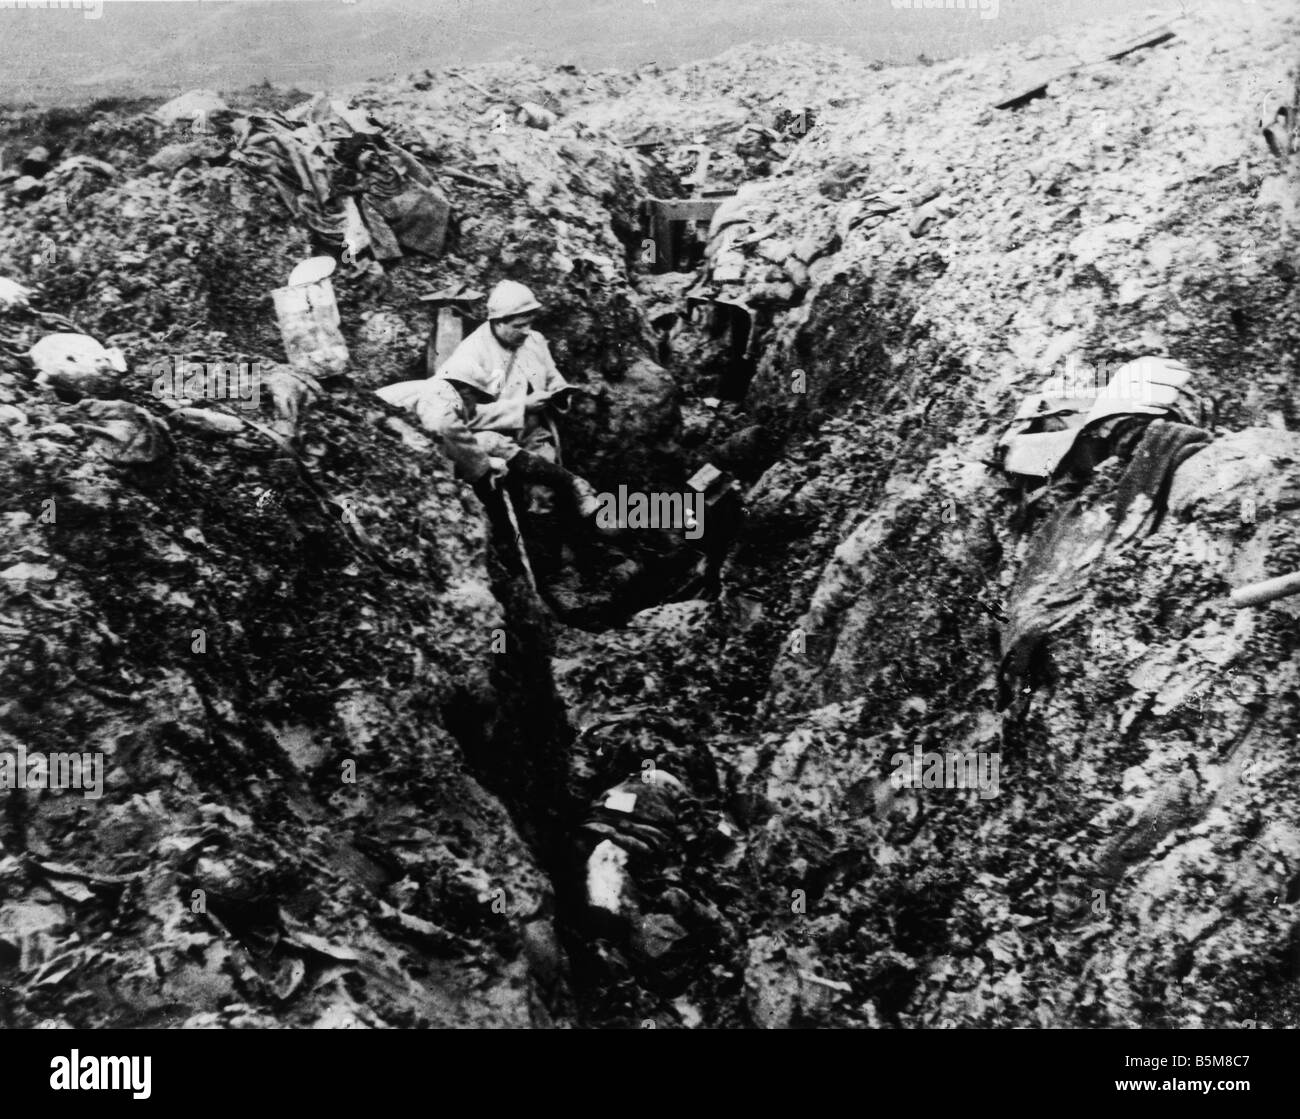 2 G55 F1 1916 17 E WWI Trench after Shellfire no date History WWI France Trench Warfare near Verdun French Soldiers in a German Stock Photo